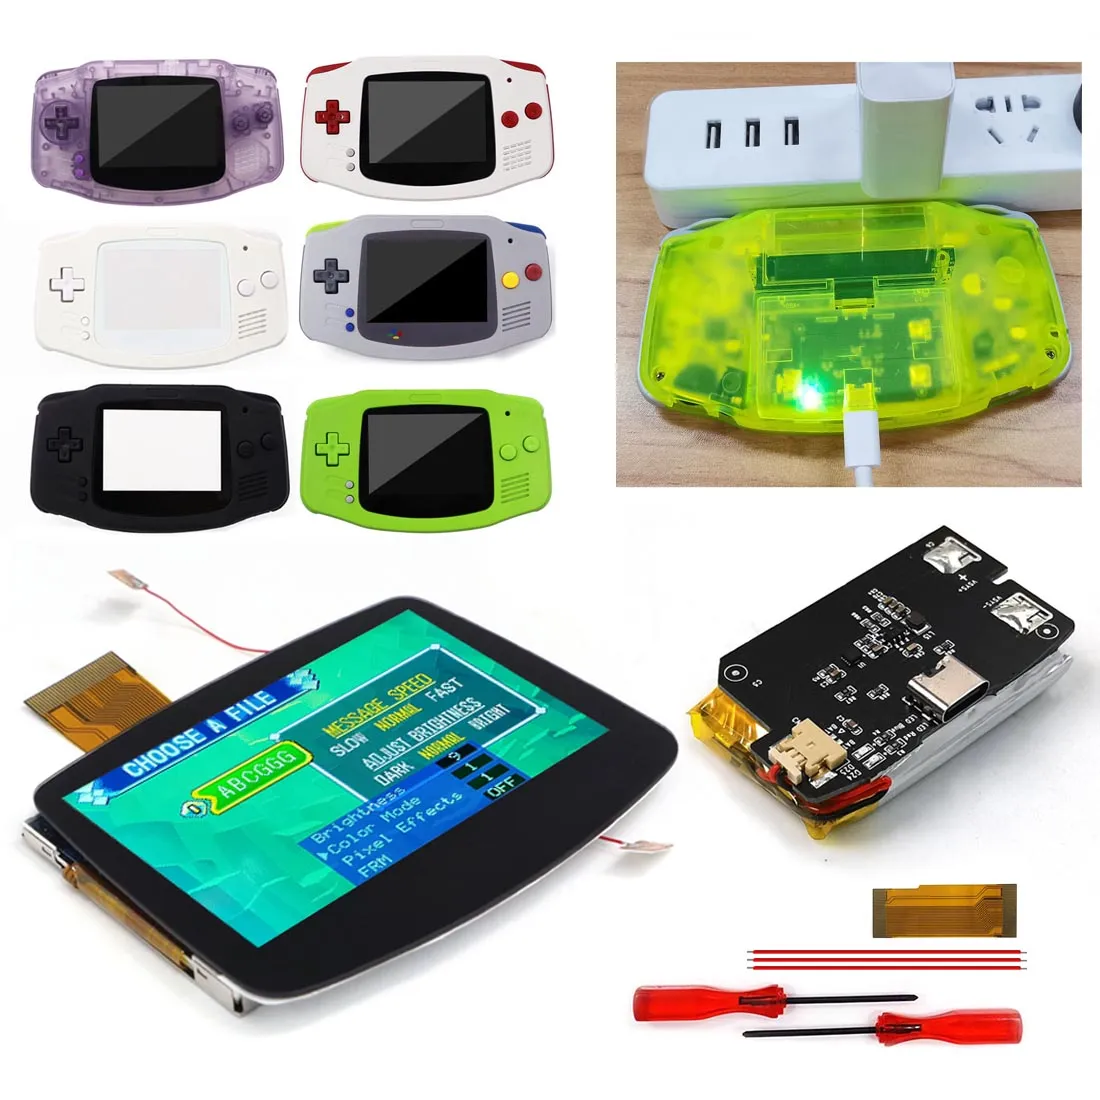 Hispeedido Drop in GBA IPS V5 LCD Screen Shell Kits W/1800mAh Rechargeable Built-in Lithium Battery for GameBoy Advance